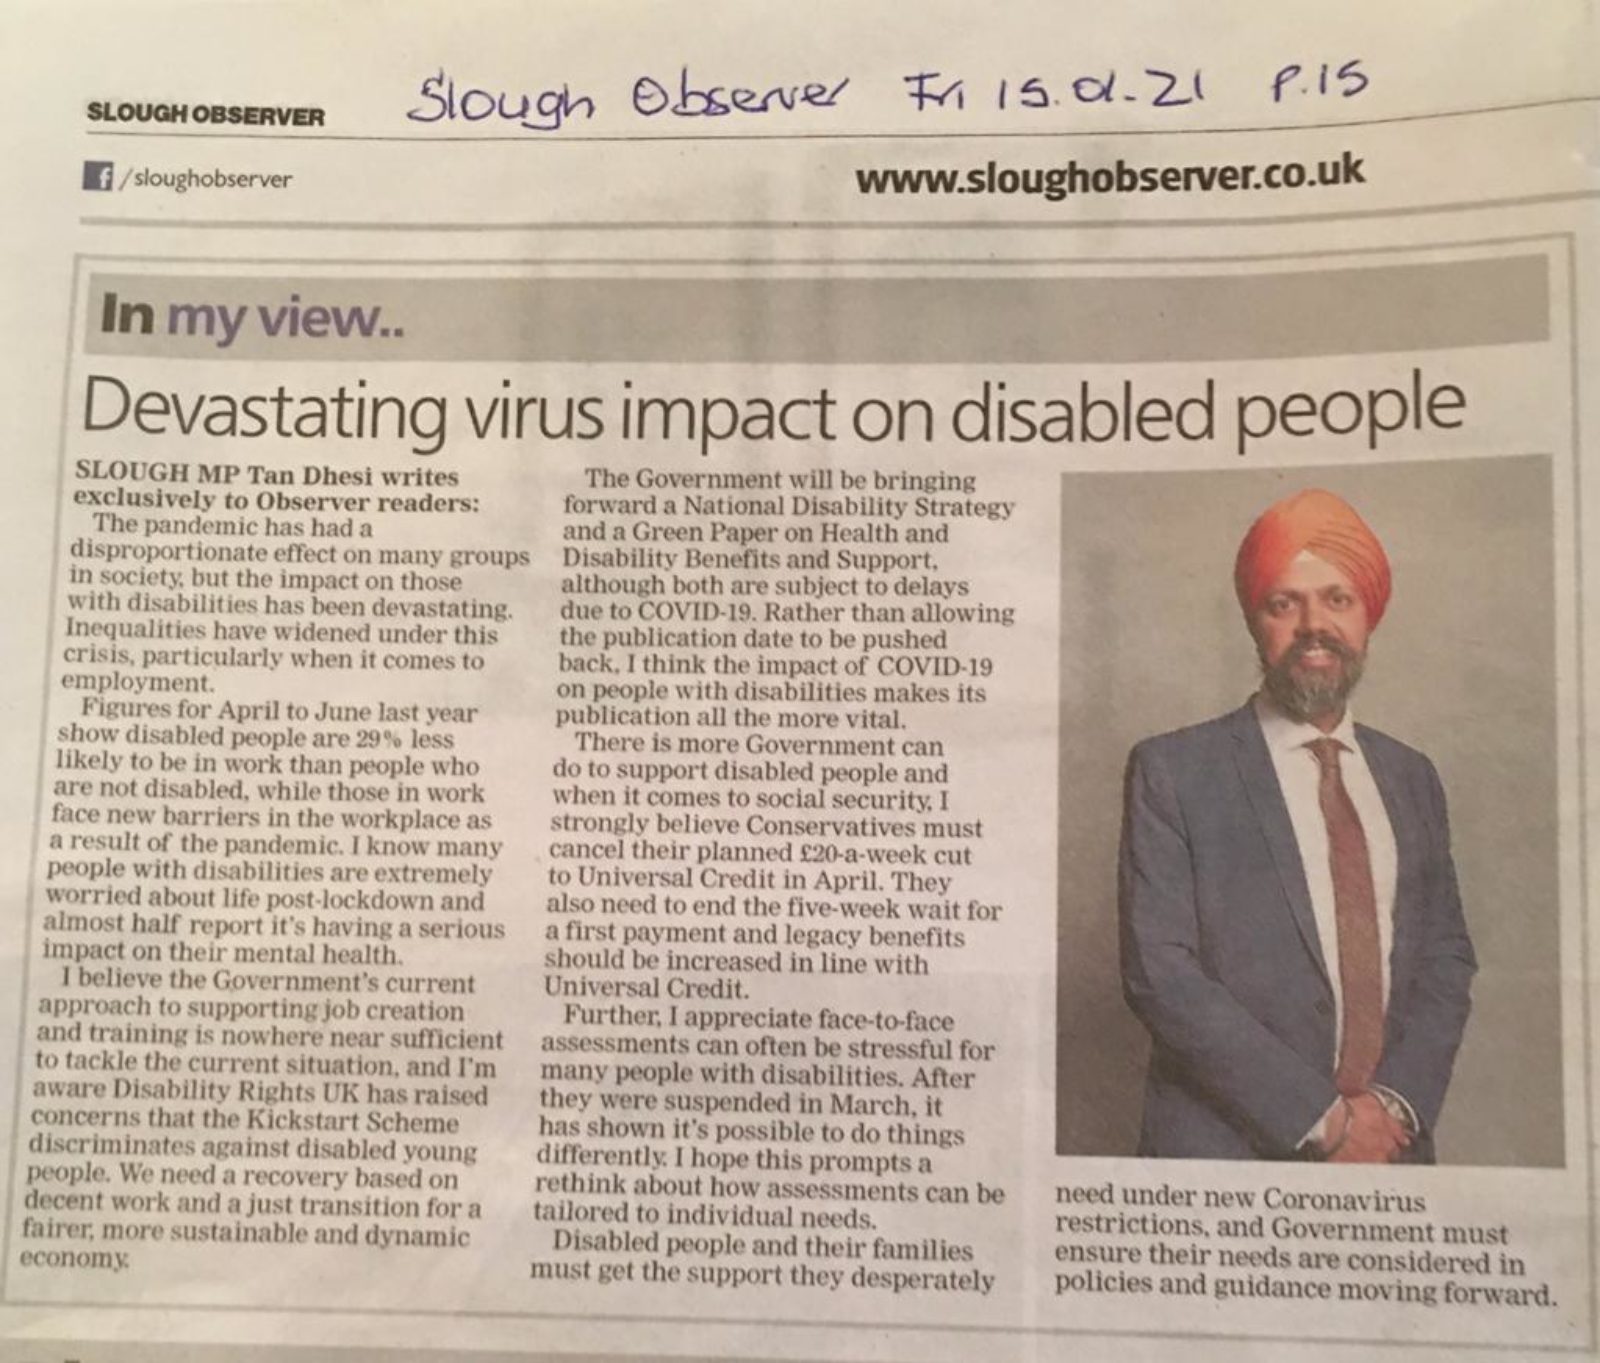 Slough Observer impact of Covid on people with disabilities